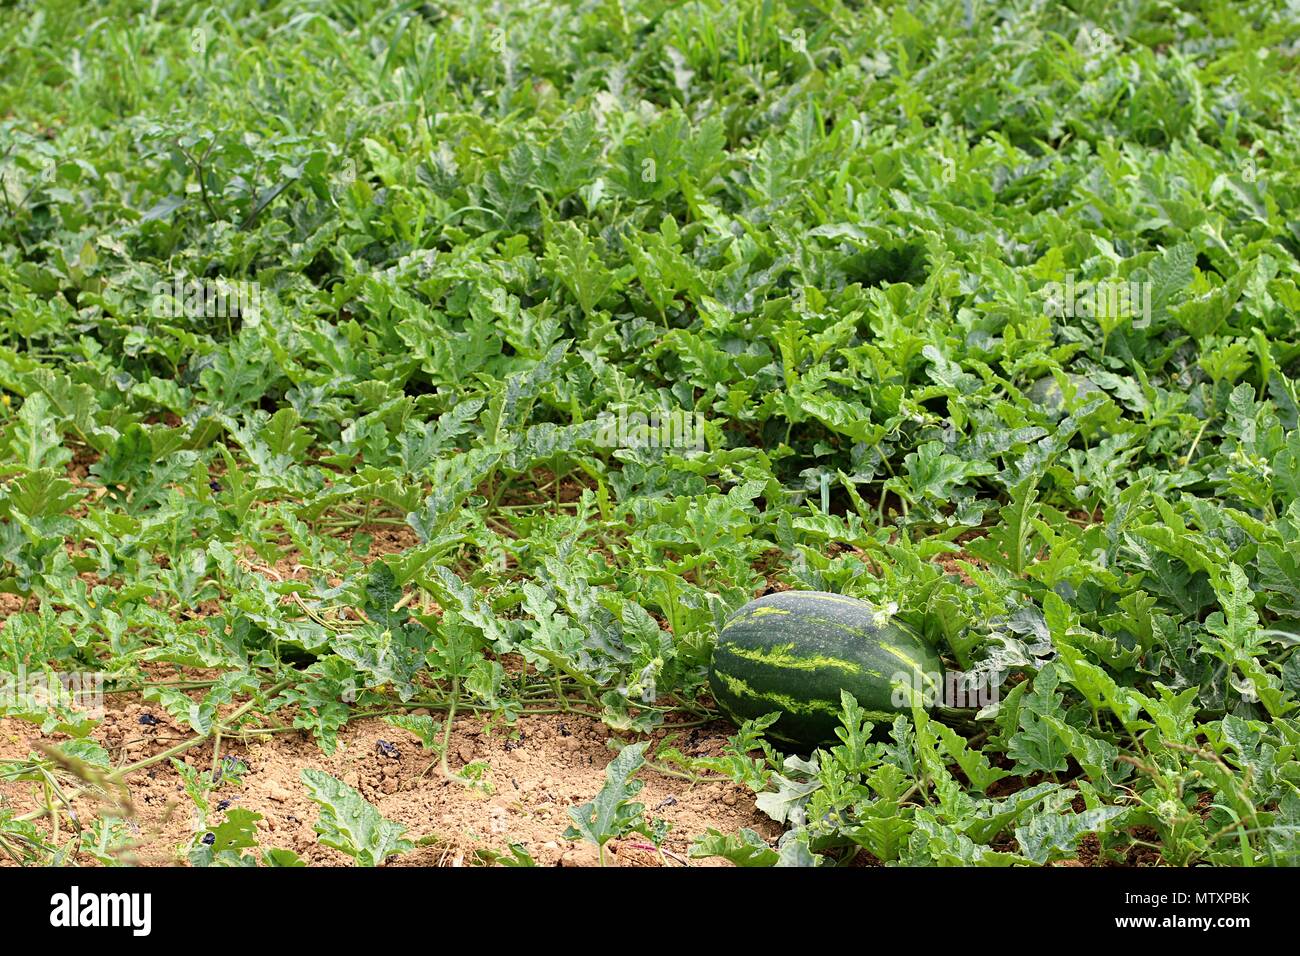 Field with watermelon (Citrullus lanatus) in the Greece Stock Photo